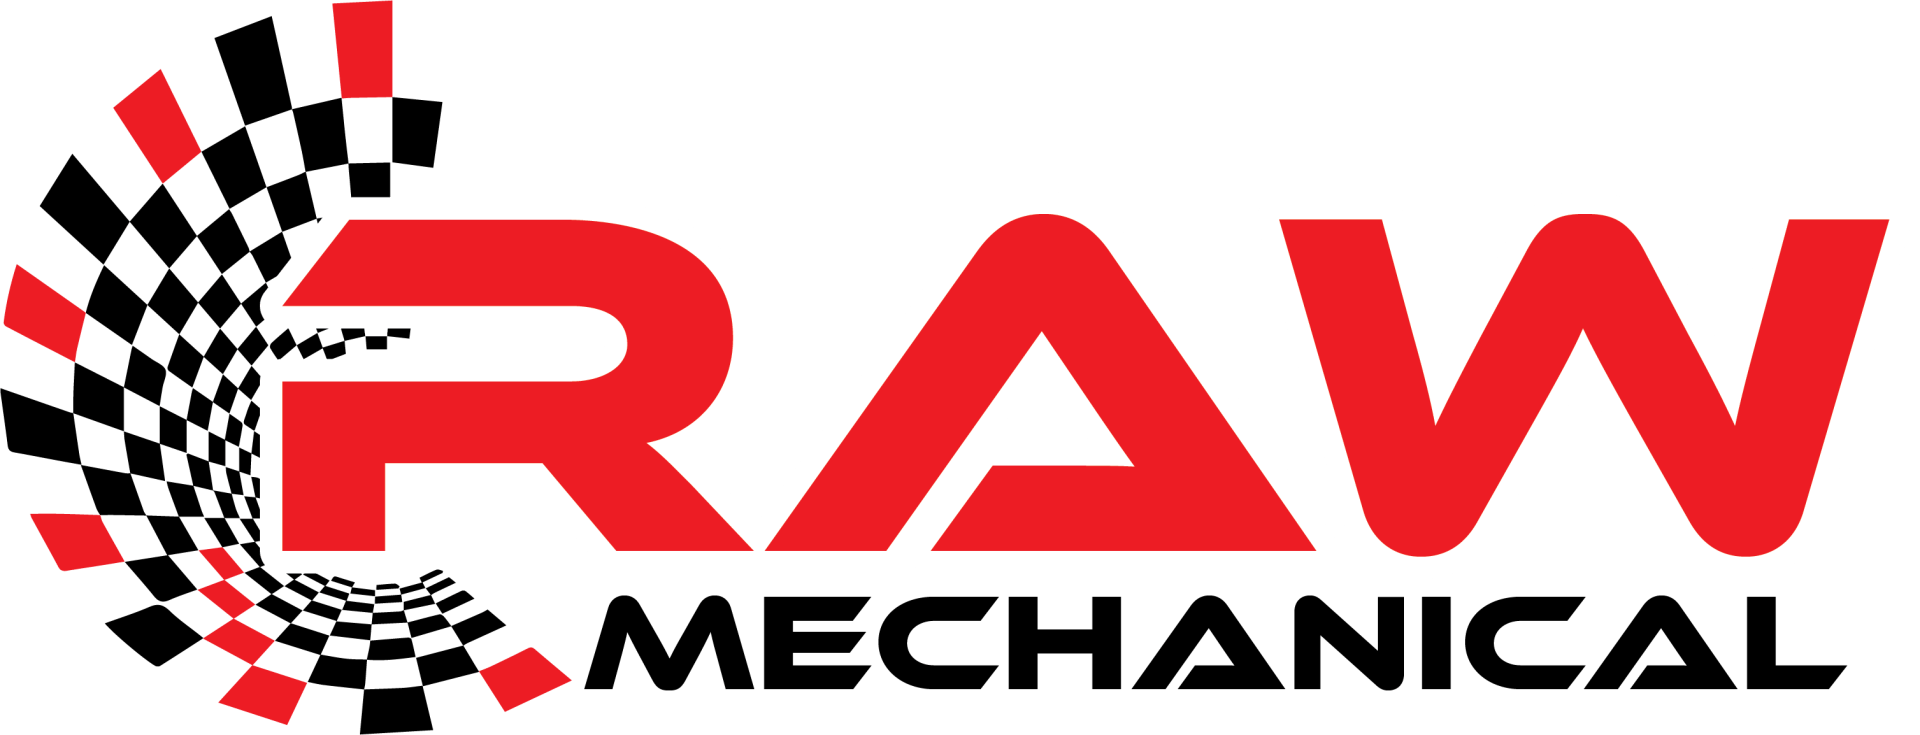 Raw Mechanical & Rust Proofing: Your Local Mechanic in Hervey Bay